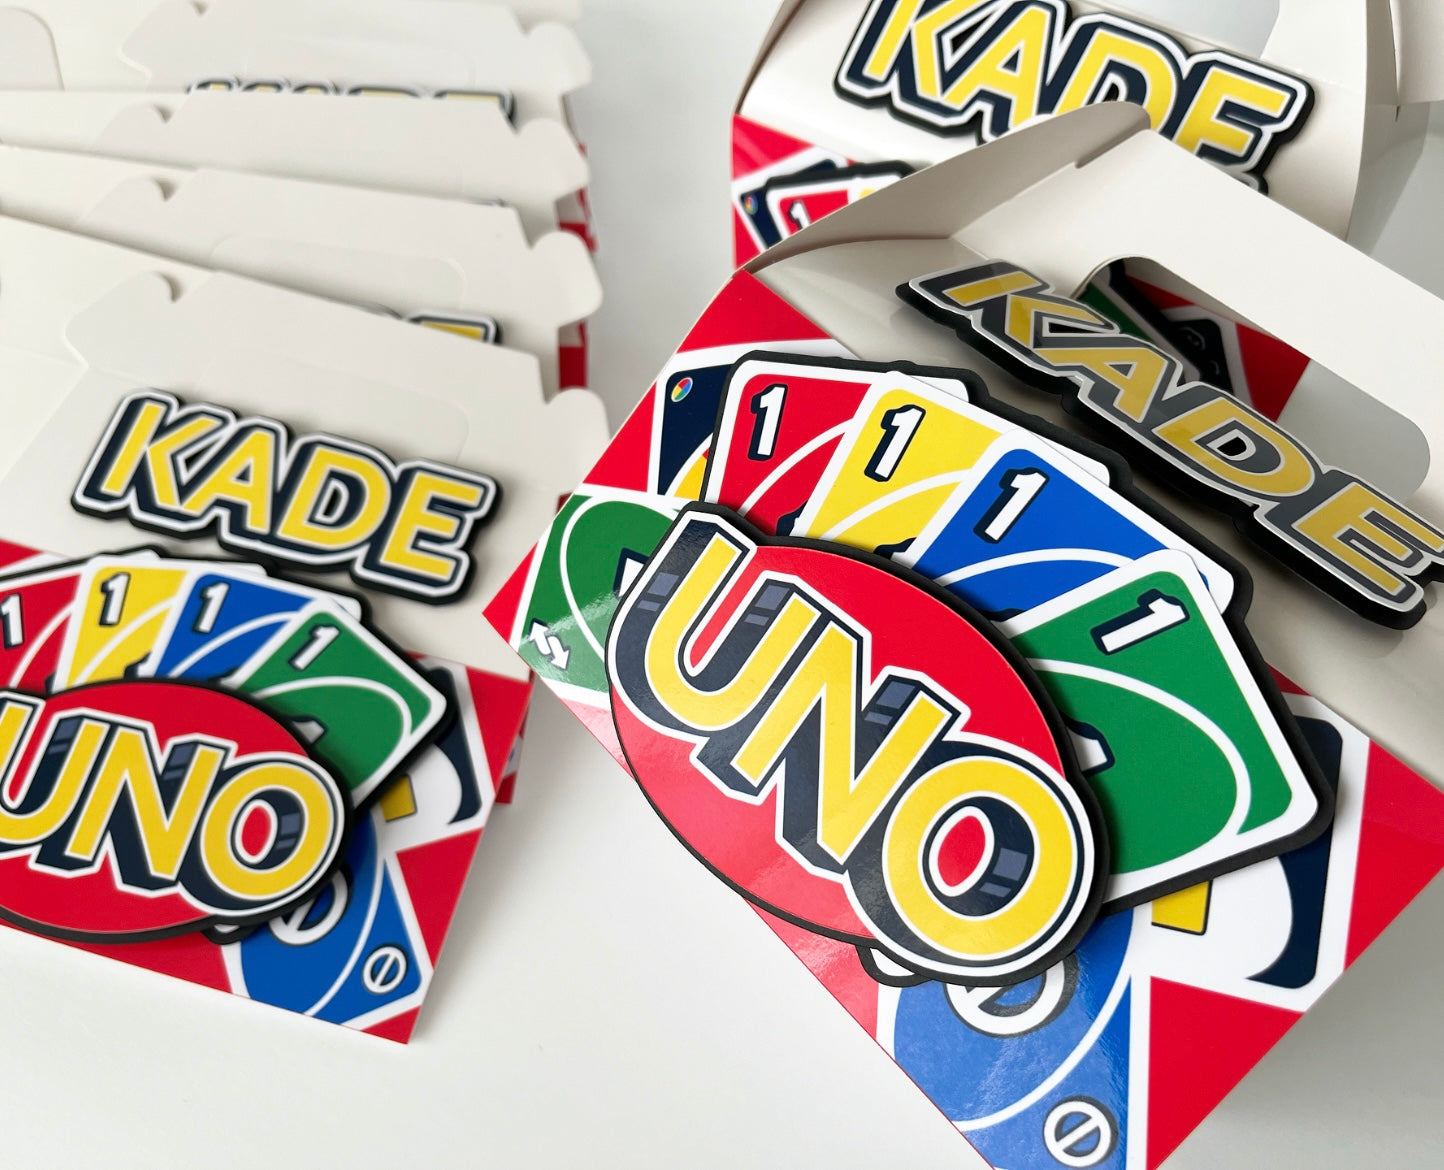 uno reverse, uno out, card games - Uno Reverse - Posters and Art Prints